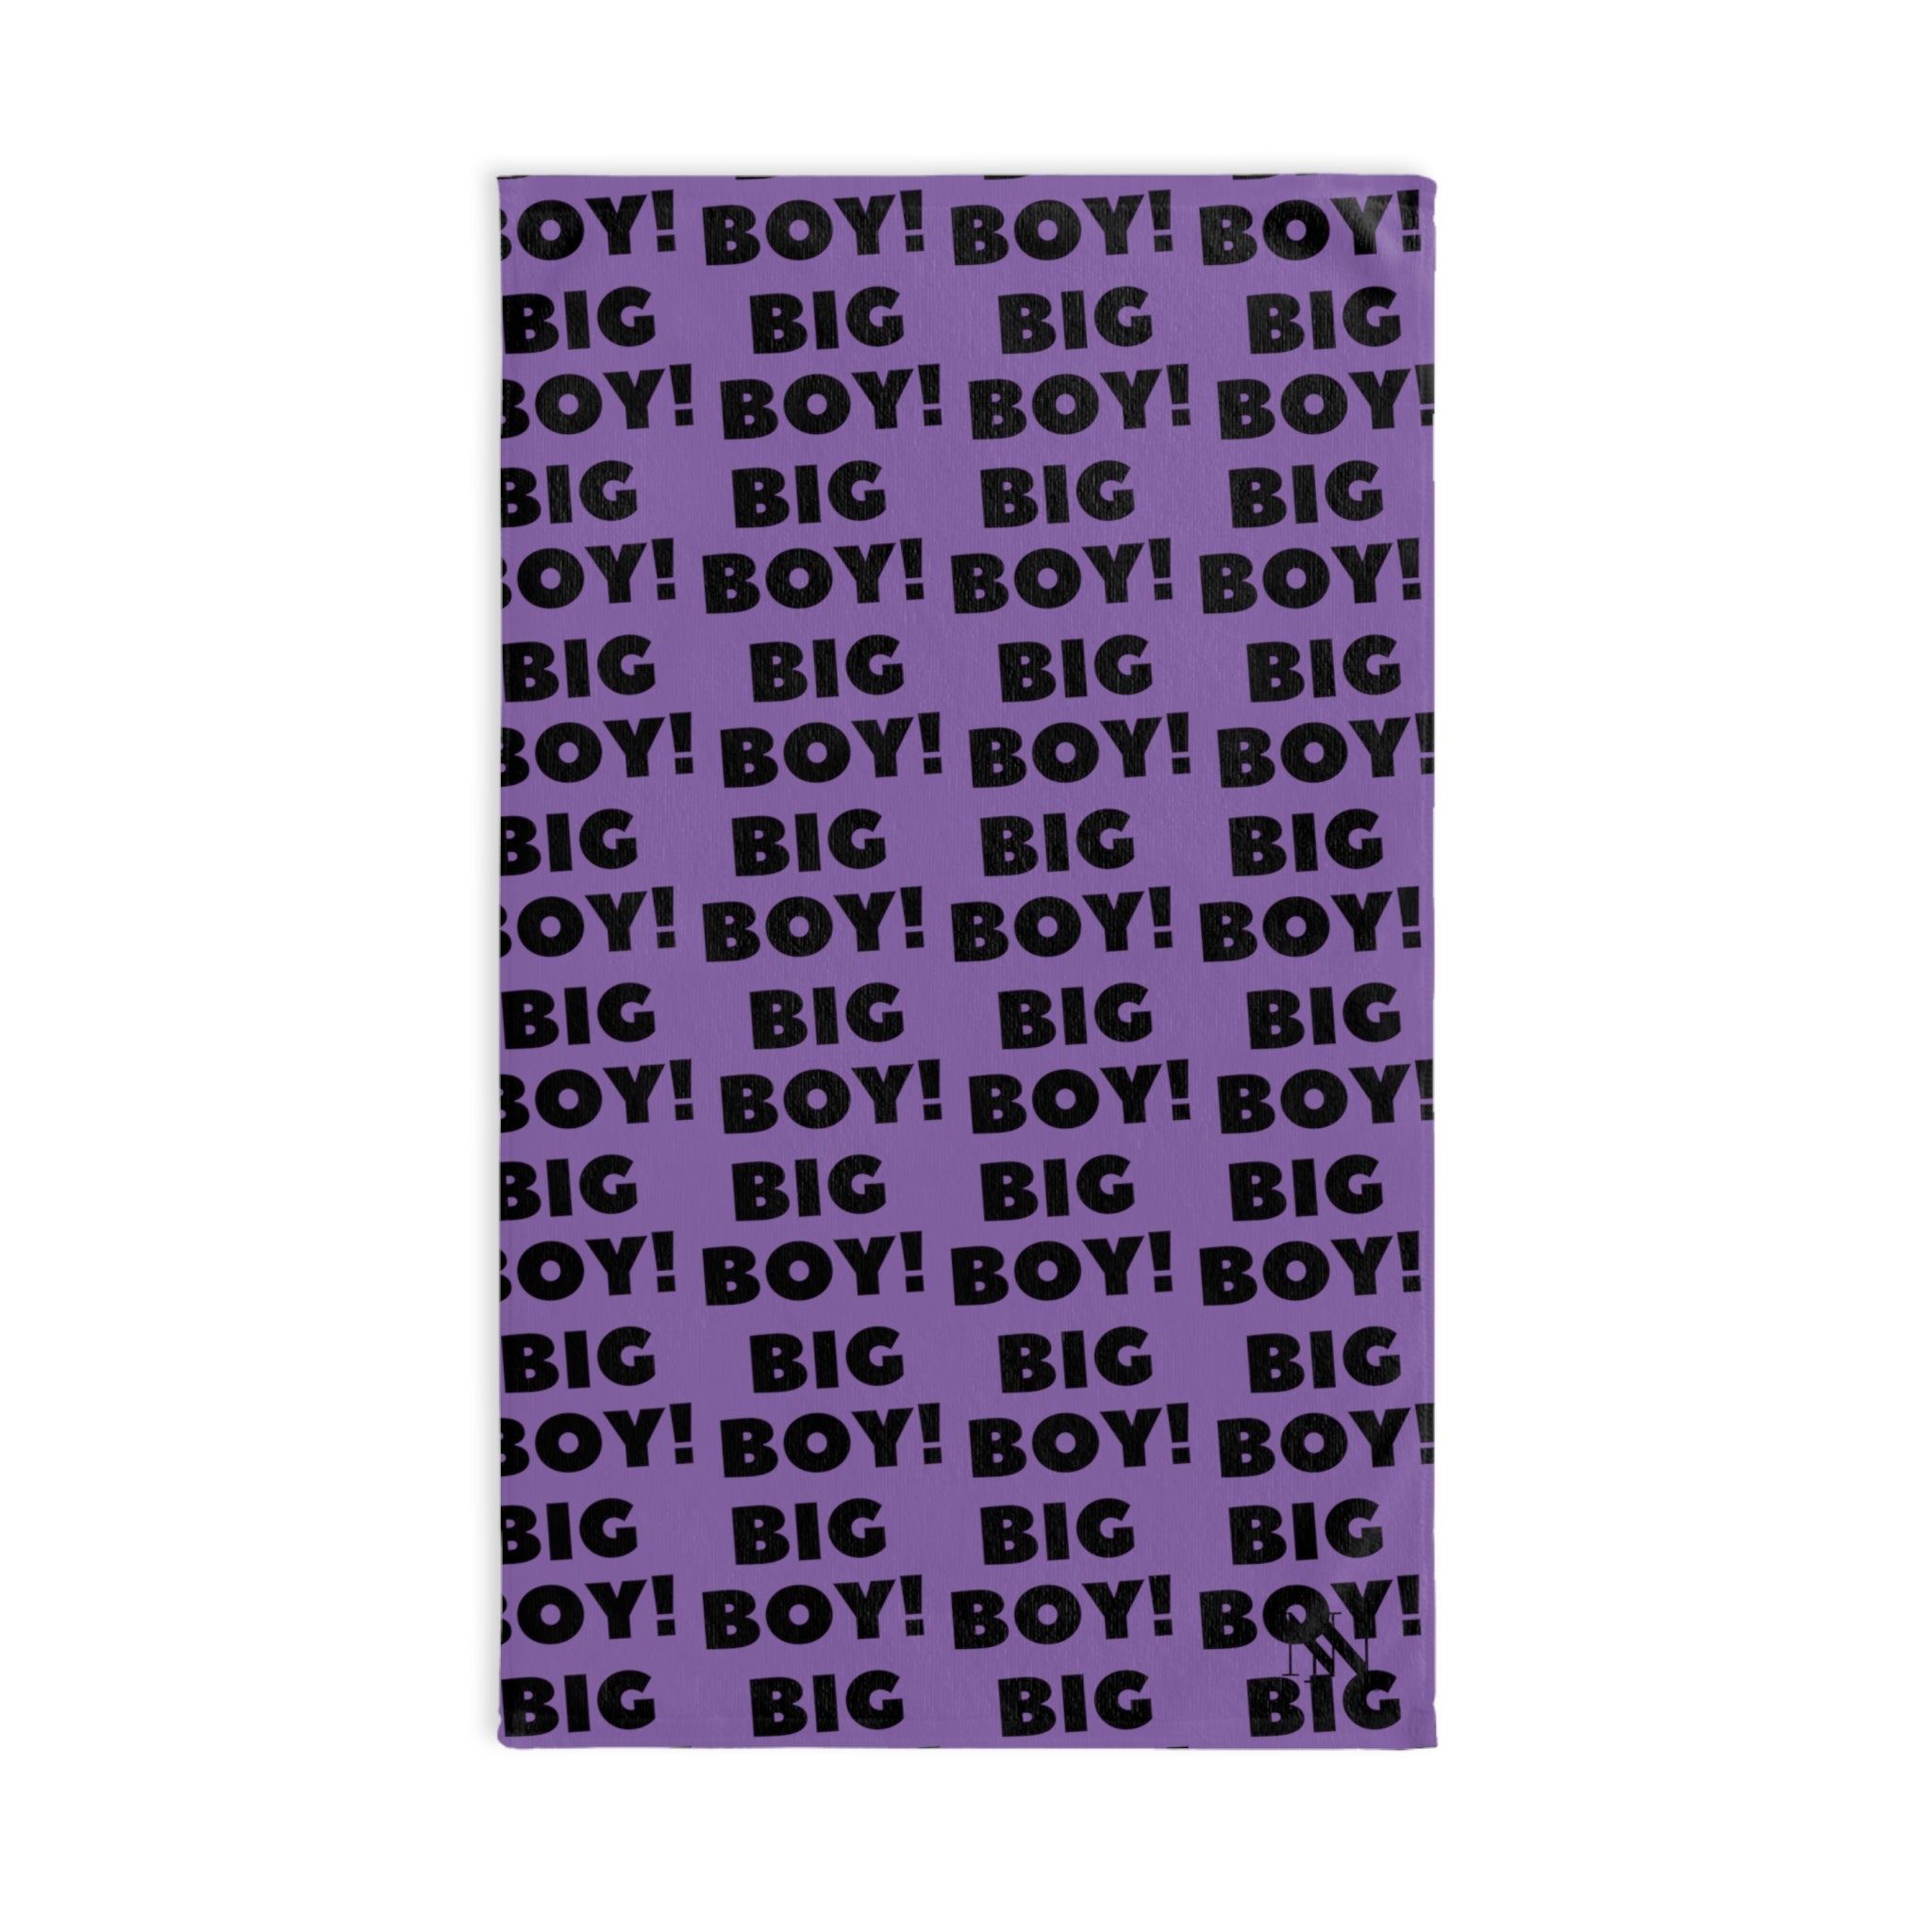 Big Boy Pattern Lavendar | Funny Gifts for Men - Gifts for Him - Birthday Gifts for Men, Him, Husband, Boyfriend, New Couple Gifts, Fathers & Valentines Day Gifts, Hand Towels Valentines NECTAR NAPKINS